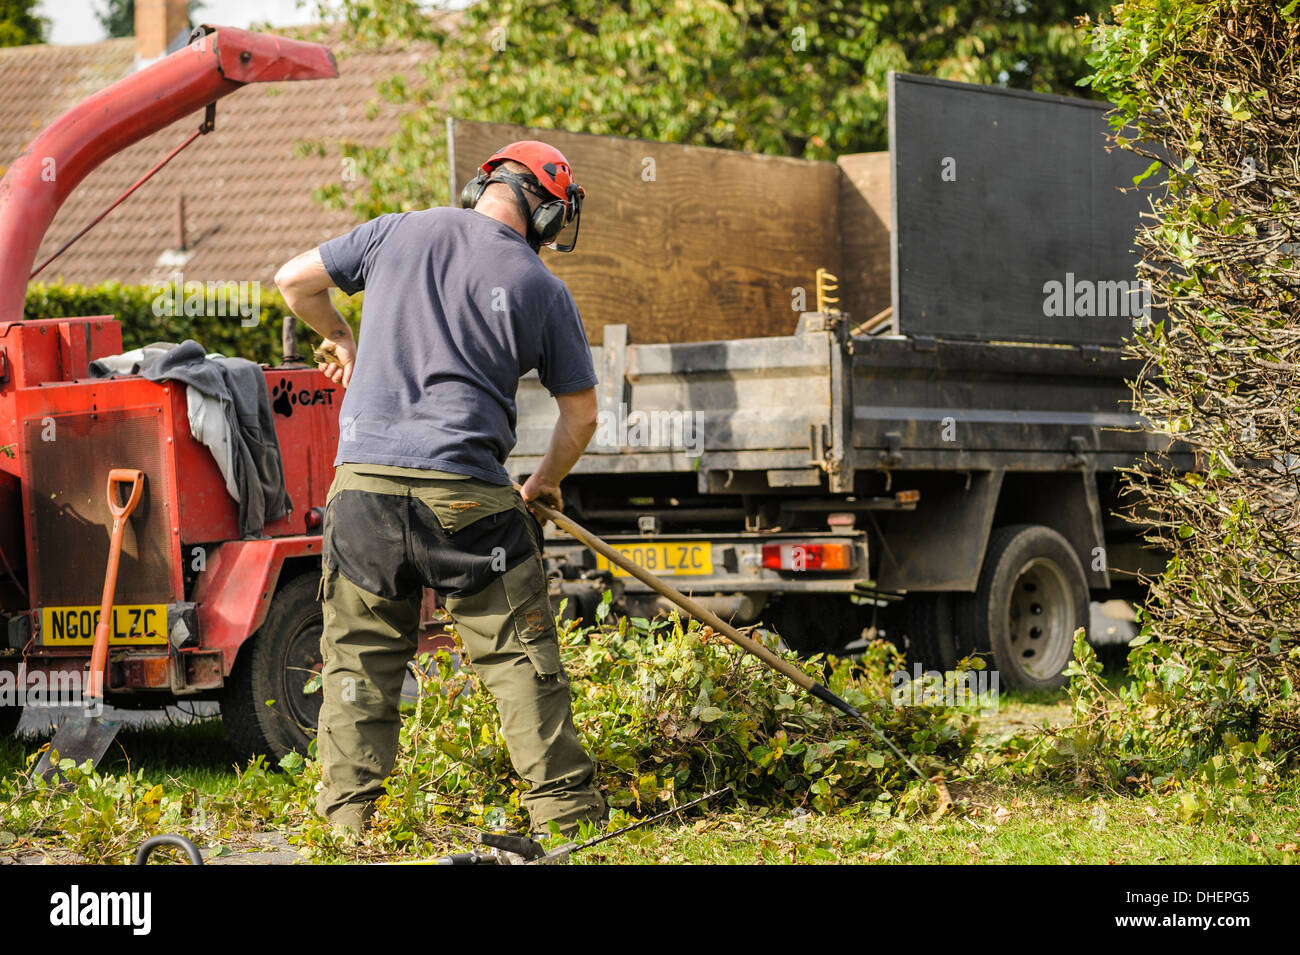 Back view of a tree surgeon in a red hard hat raking up hedge trimmings. Garden maintenance outside outdoors Stock Photo